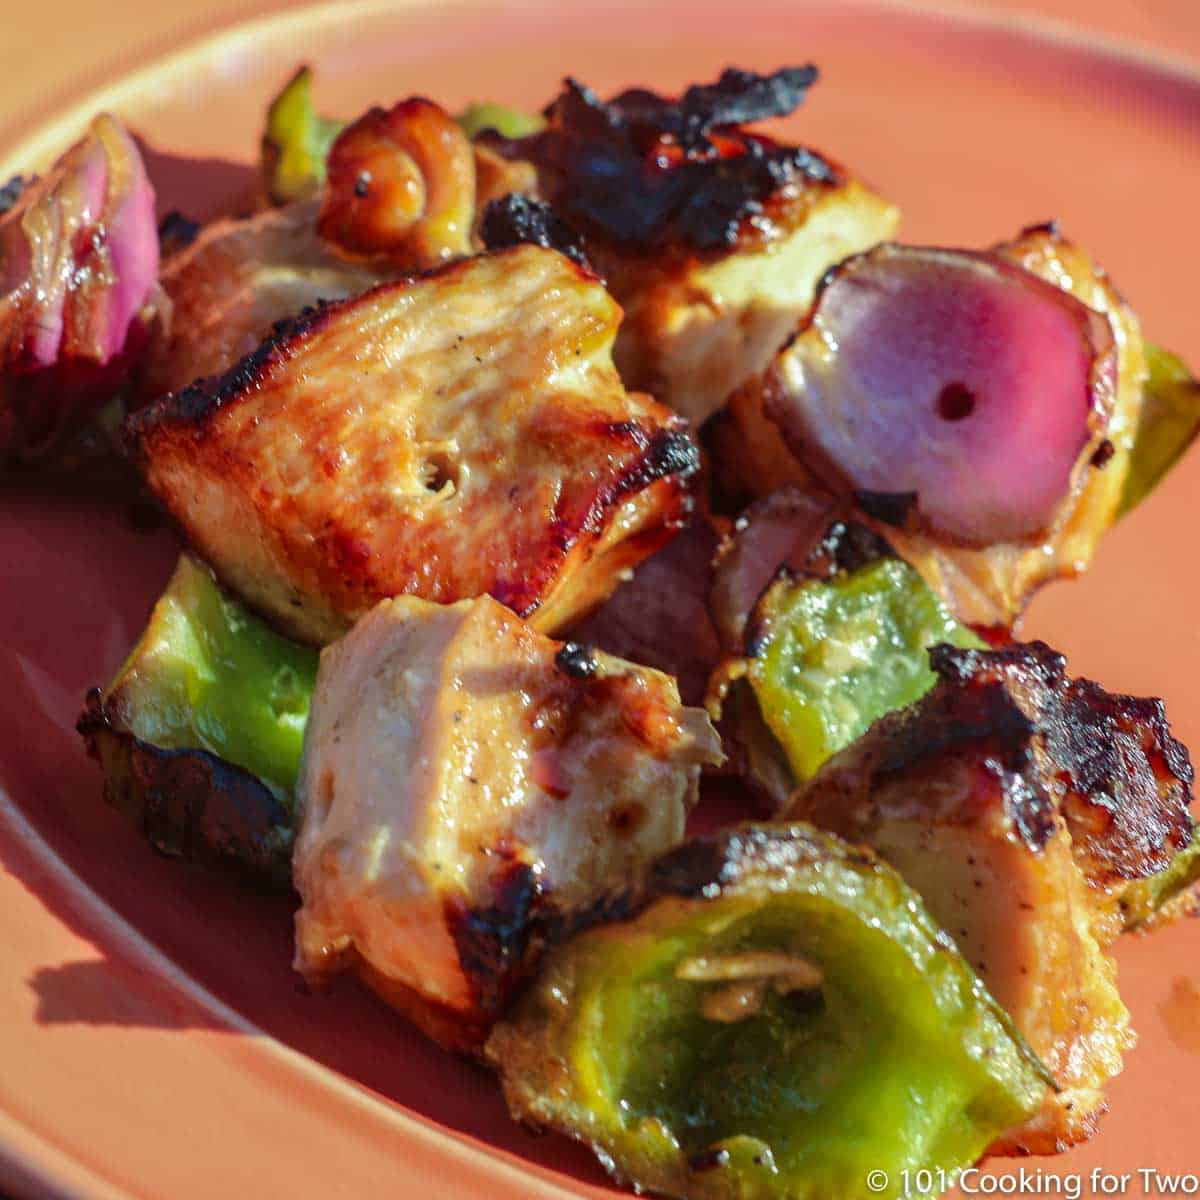 grilled chicken chunks with veggies on orange plate.